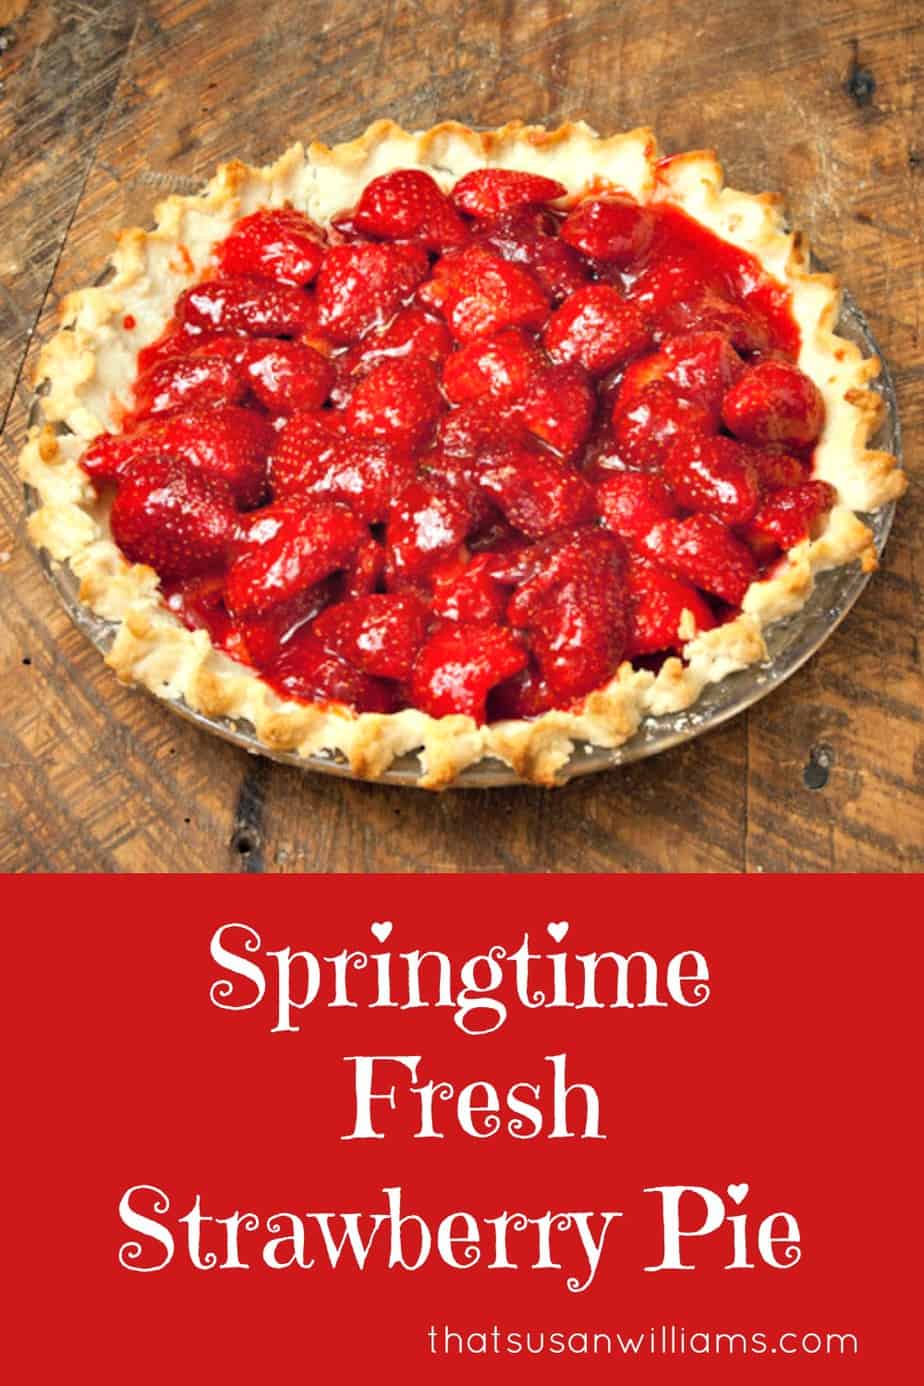 Springtime Fresh Strawberry Pie is a strawberry recipe that sings spring. This is my favorite strawberry dessert recipe ever.